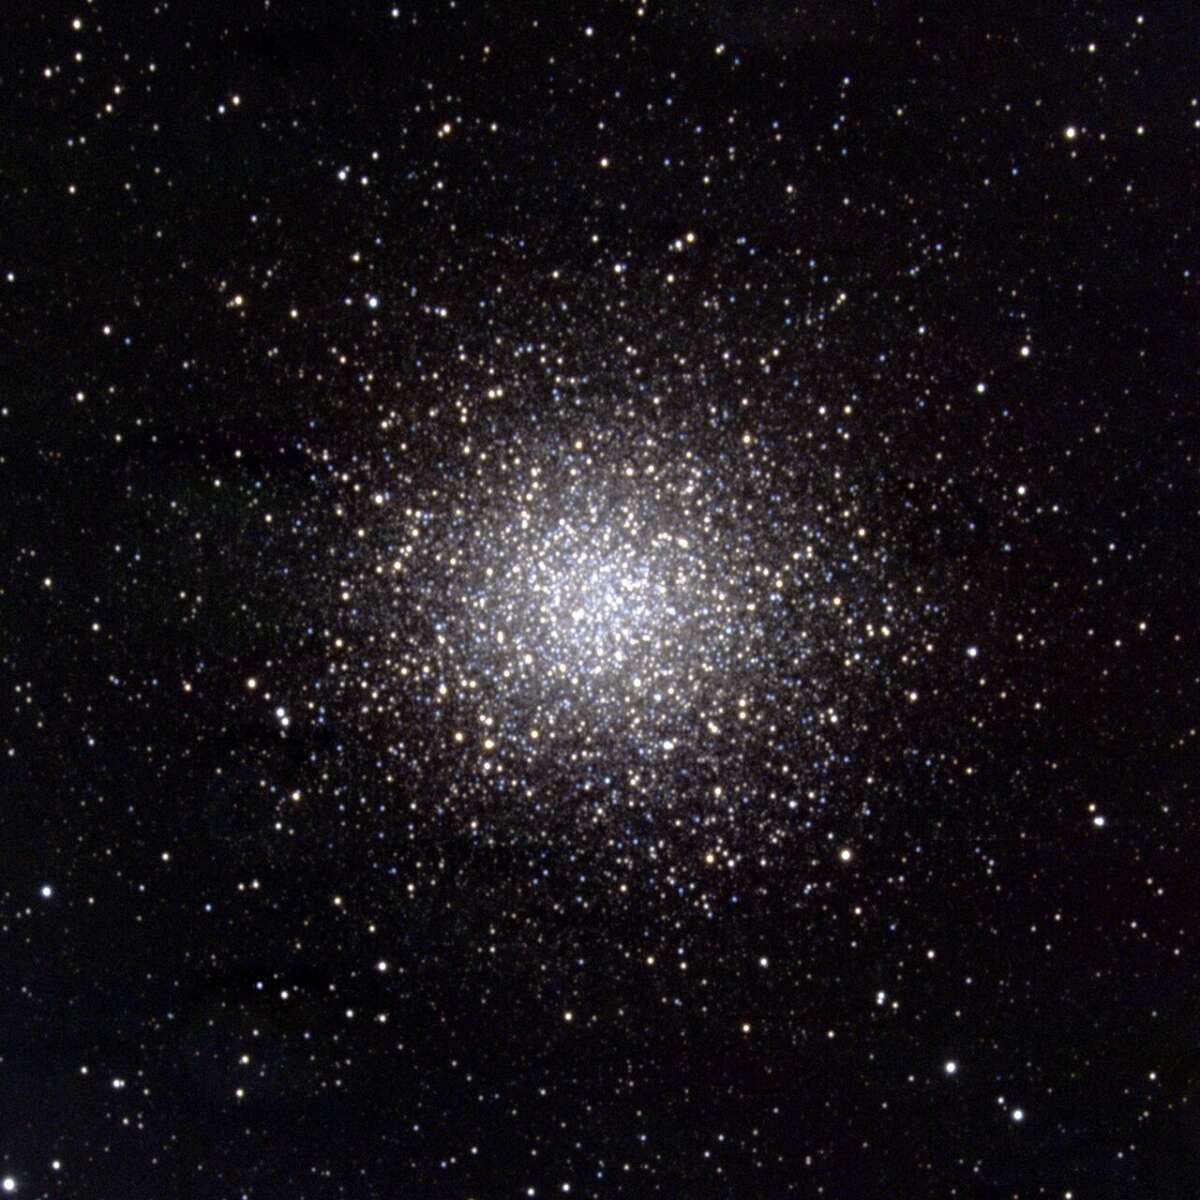 Hubble considered an ancient globular cluster of stars and its multiple stellar populations